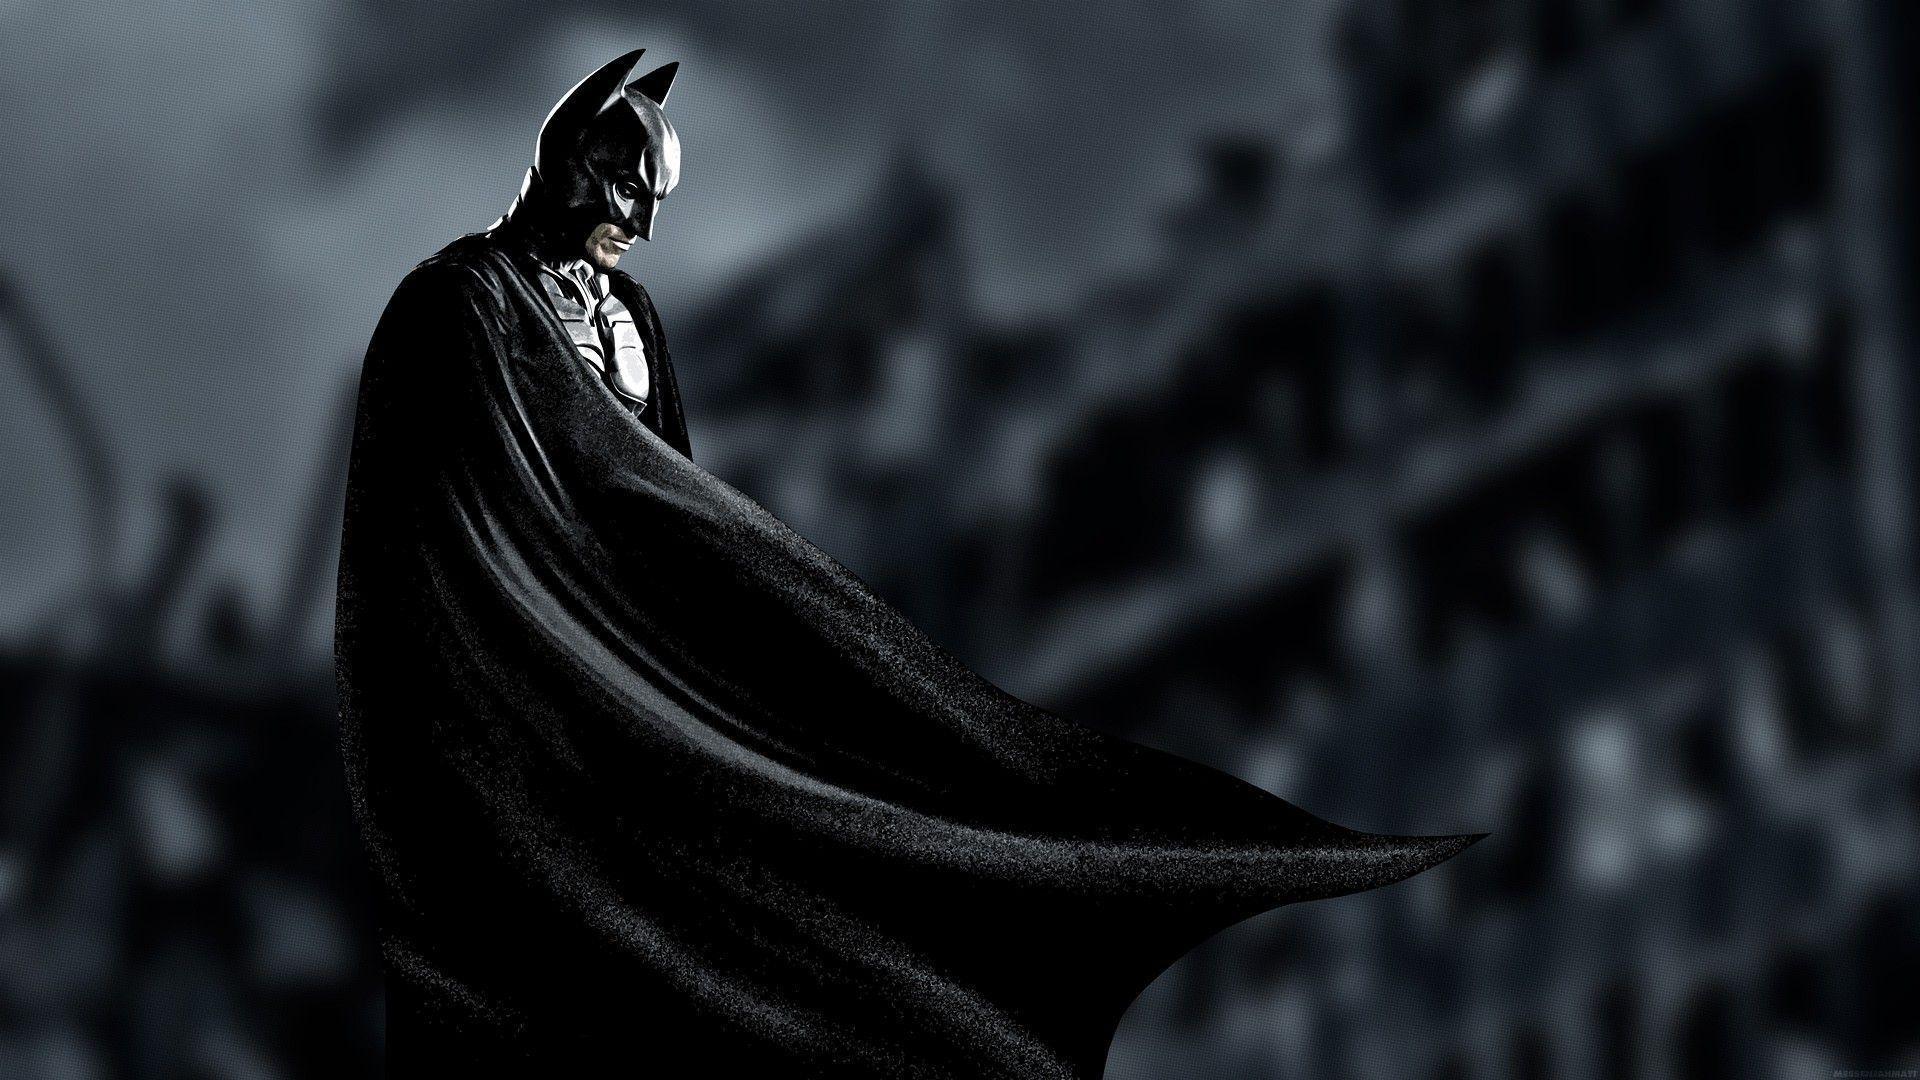 Wallpapers For gt; Batman Wallpapers Hd For Pc